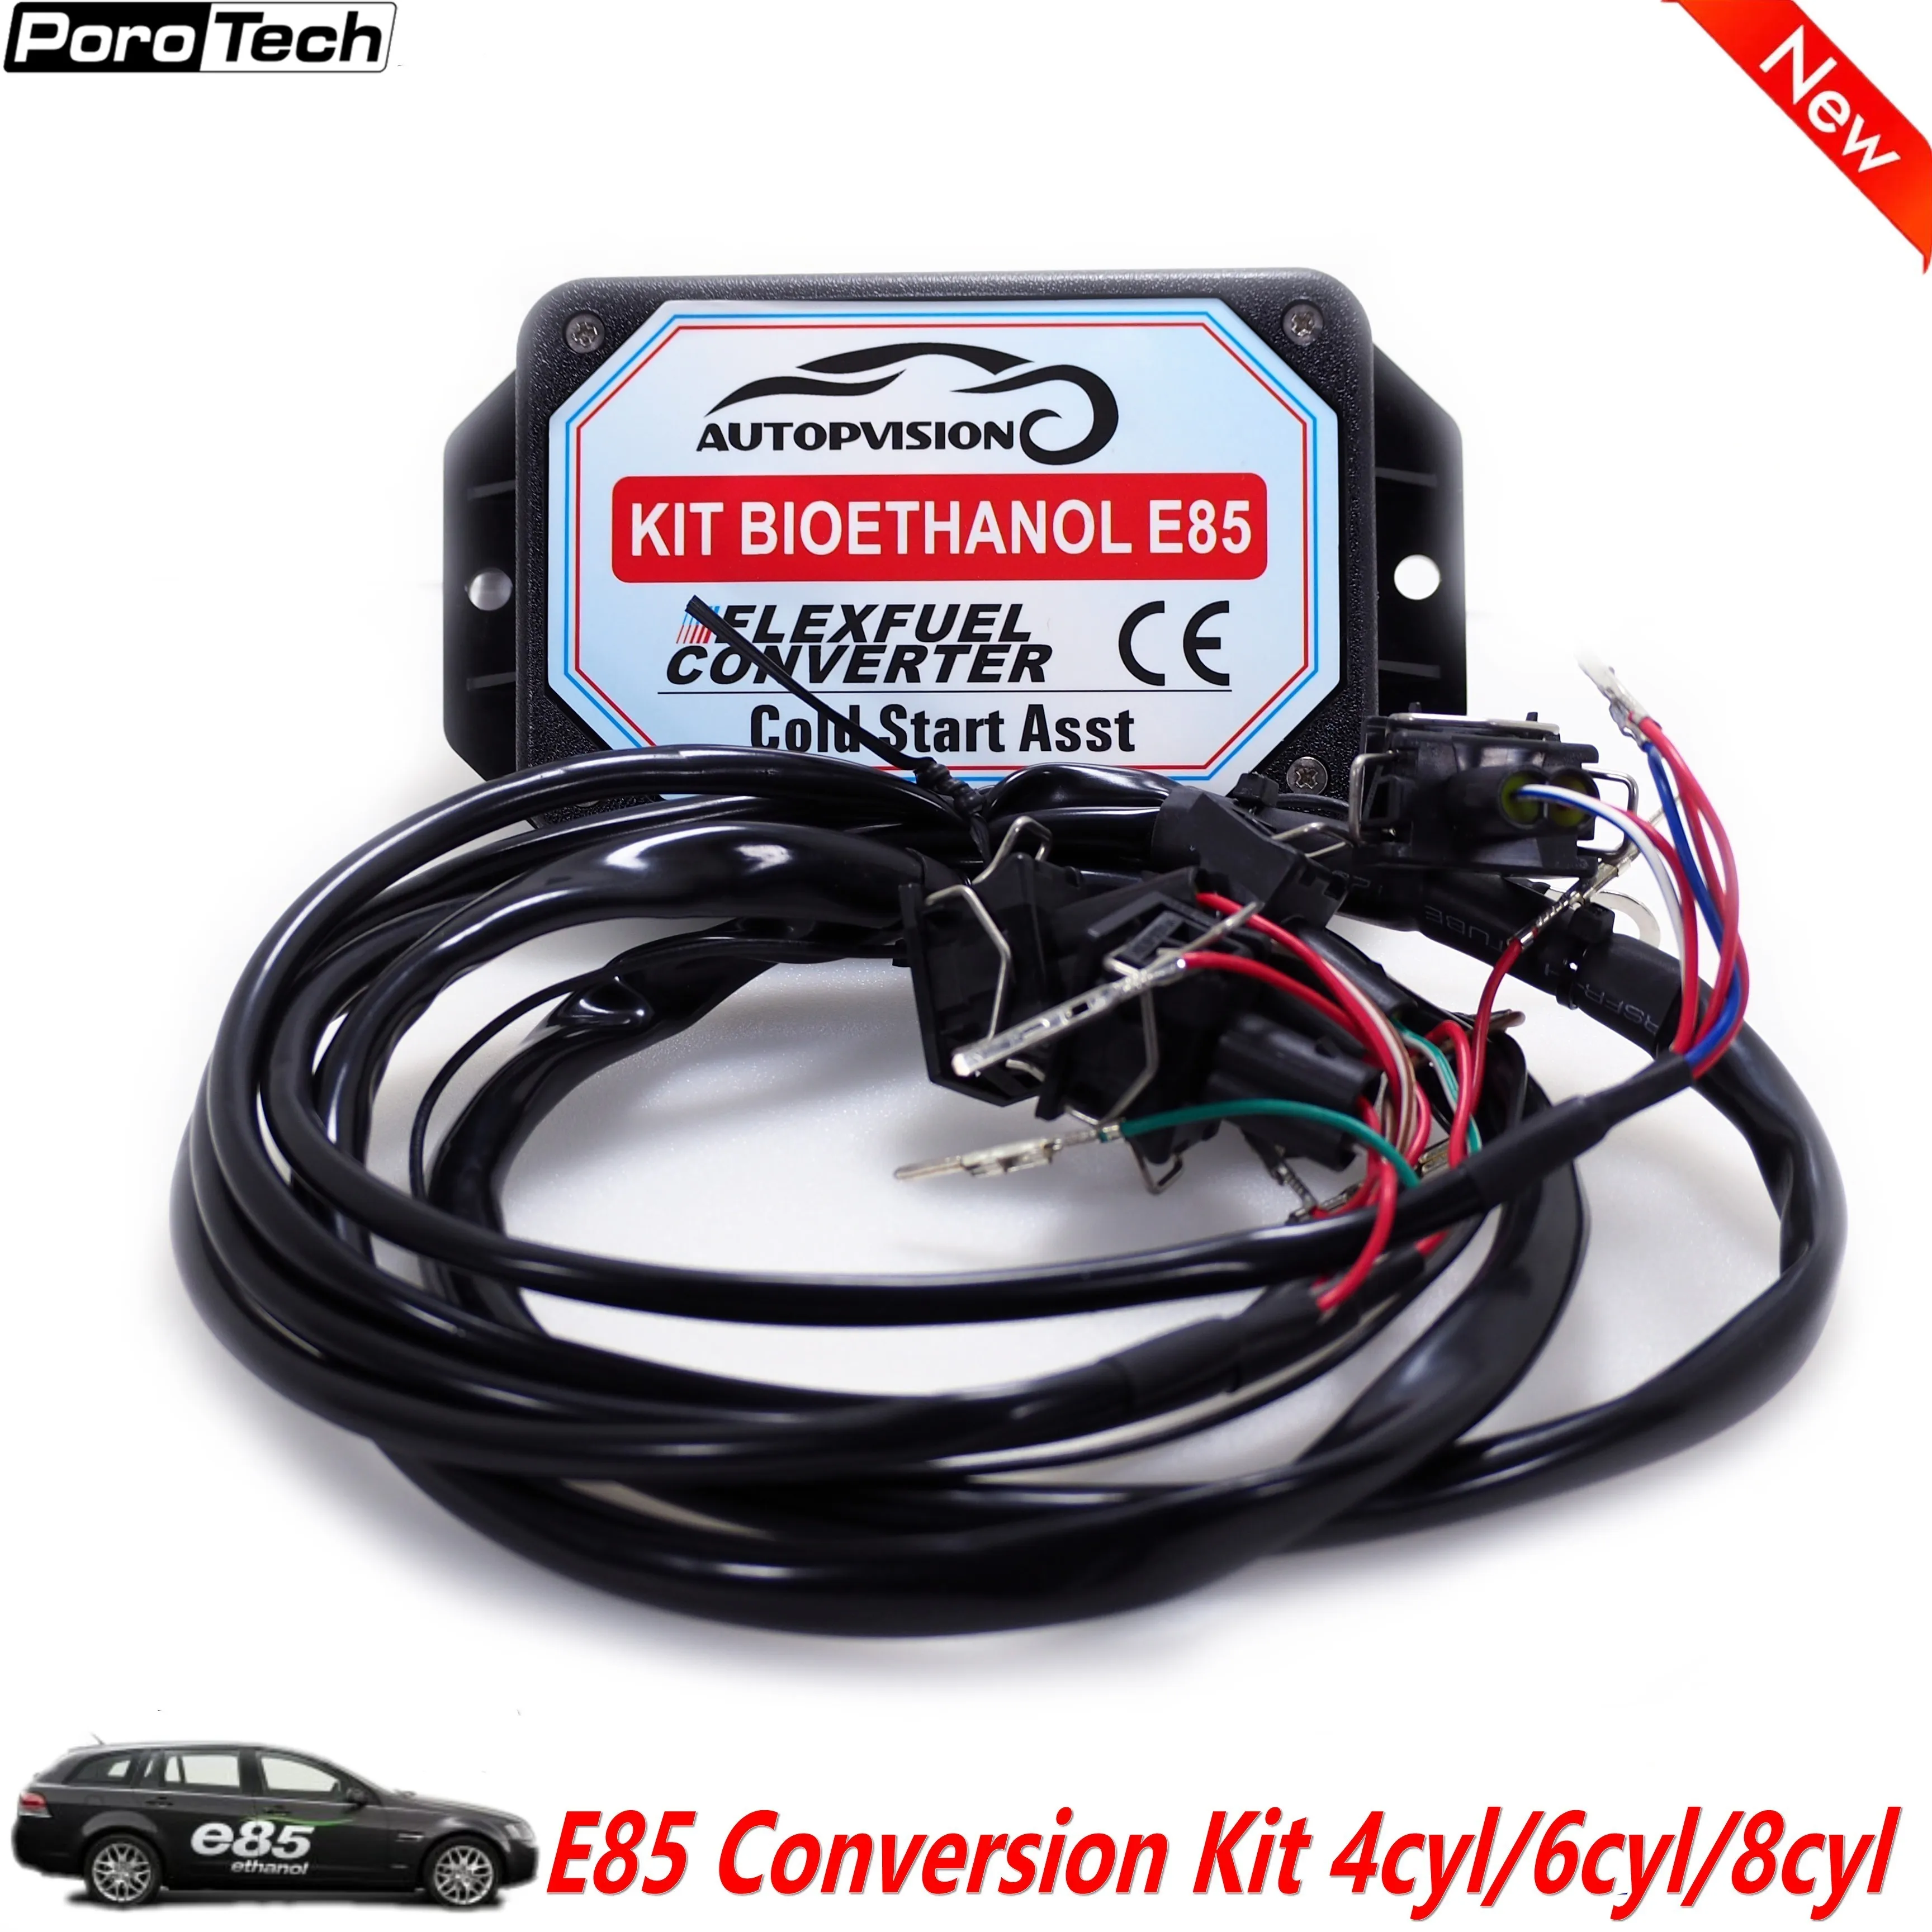 NEW cool start E85 4/6/8CYL Conversion kit Flex Fuel ethanol Car, work with car original fuel injection system adjust air/fuel